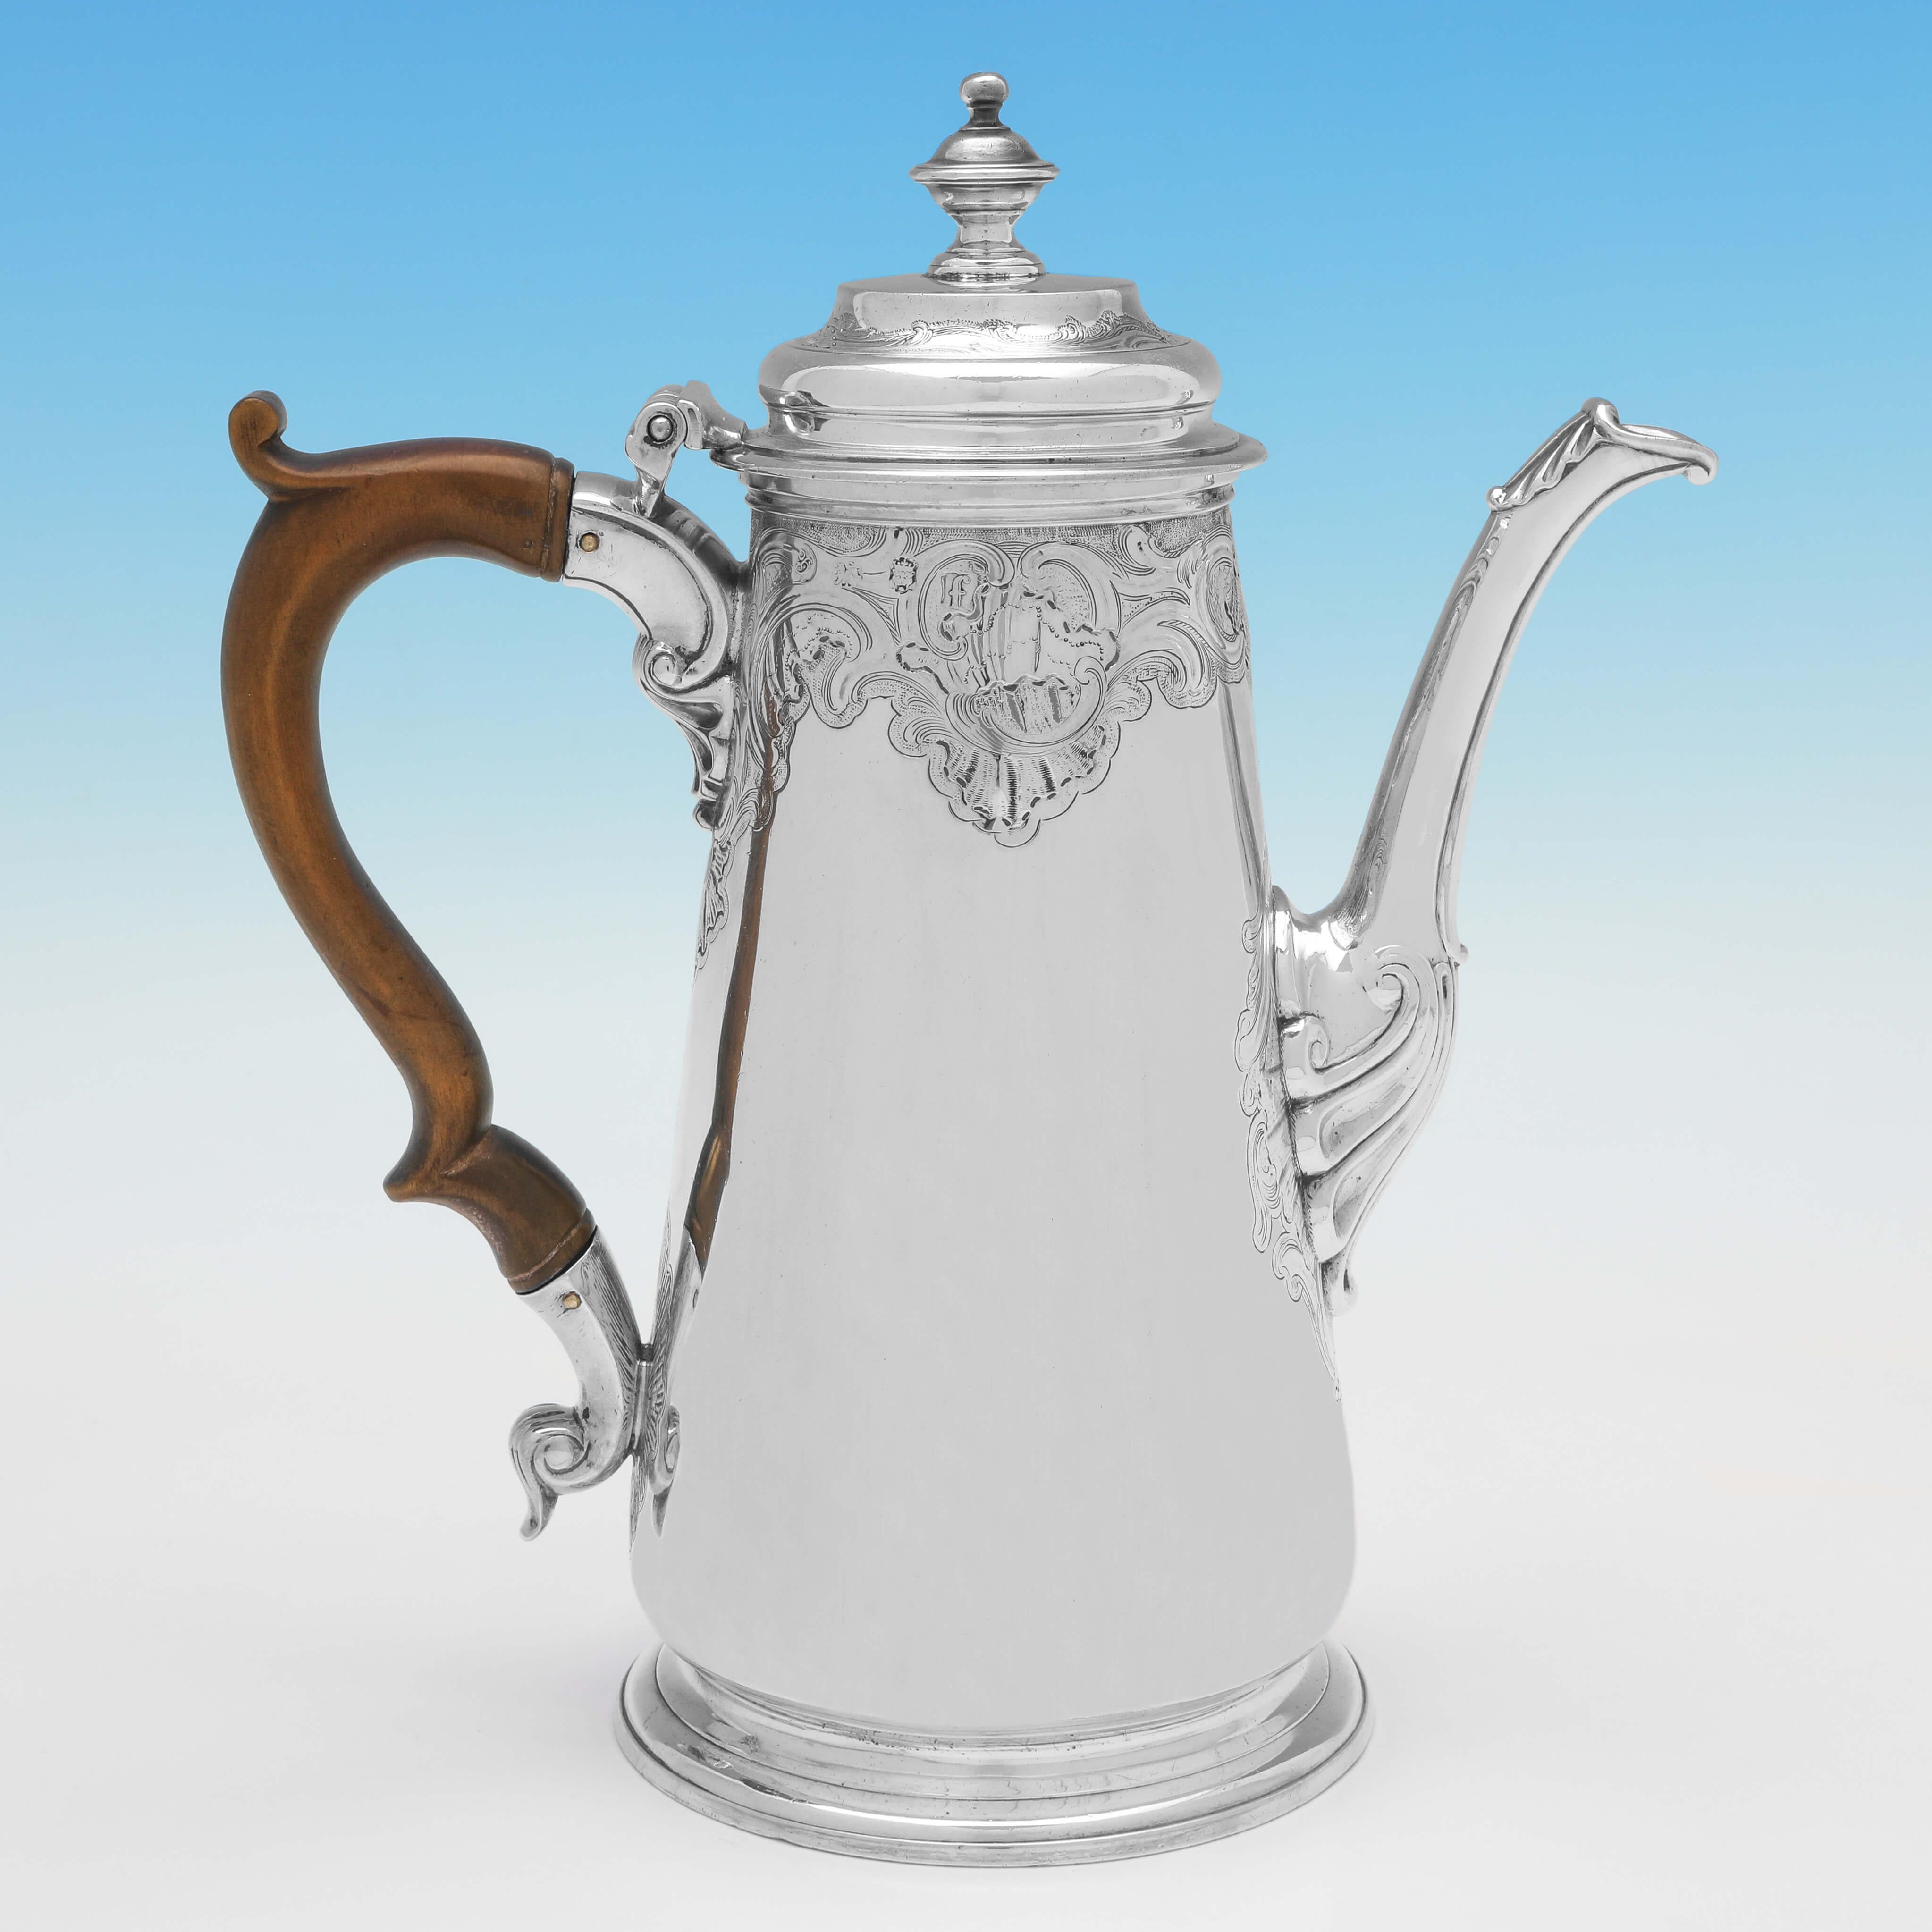 Hallmarked in London in 1741 by Gabriel Sleath, this striking, George II, Antique Sterling Silver Coffee Pot, features flat chased decoration below the rim, an engraved armorial to one side, and a wooden handle. 

The coffee pot measures 9